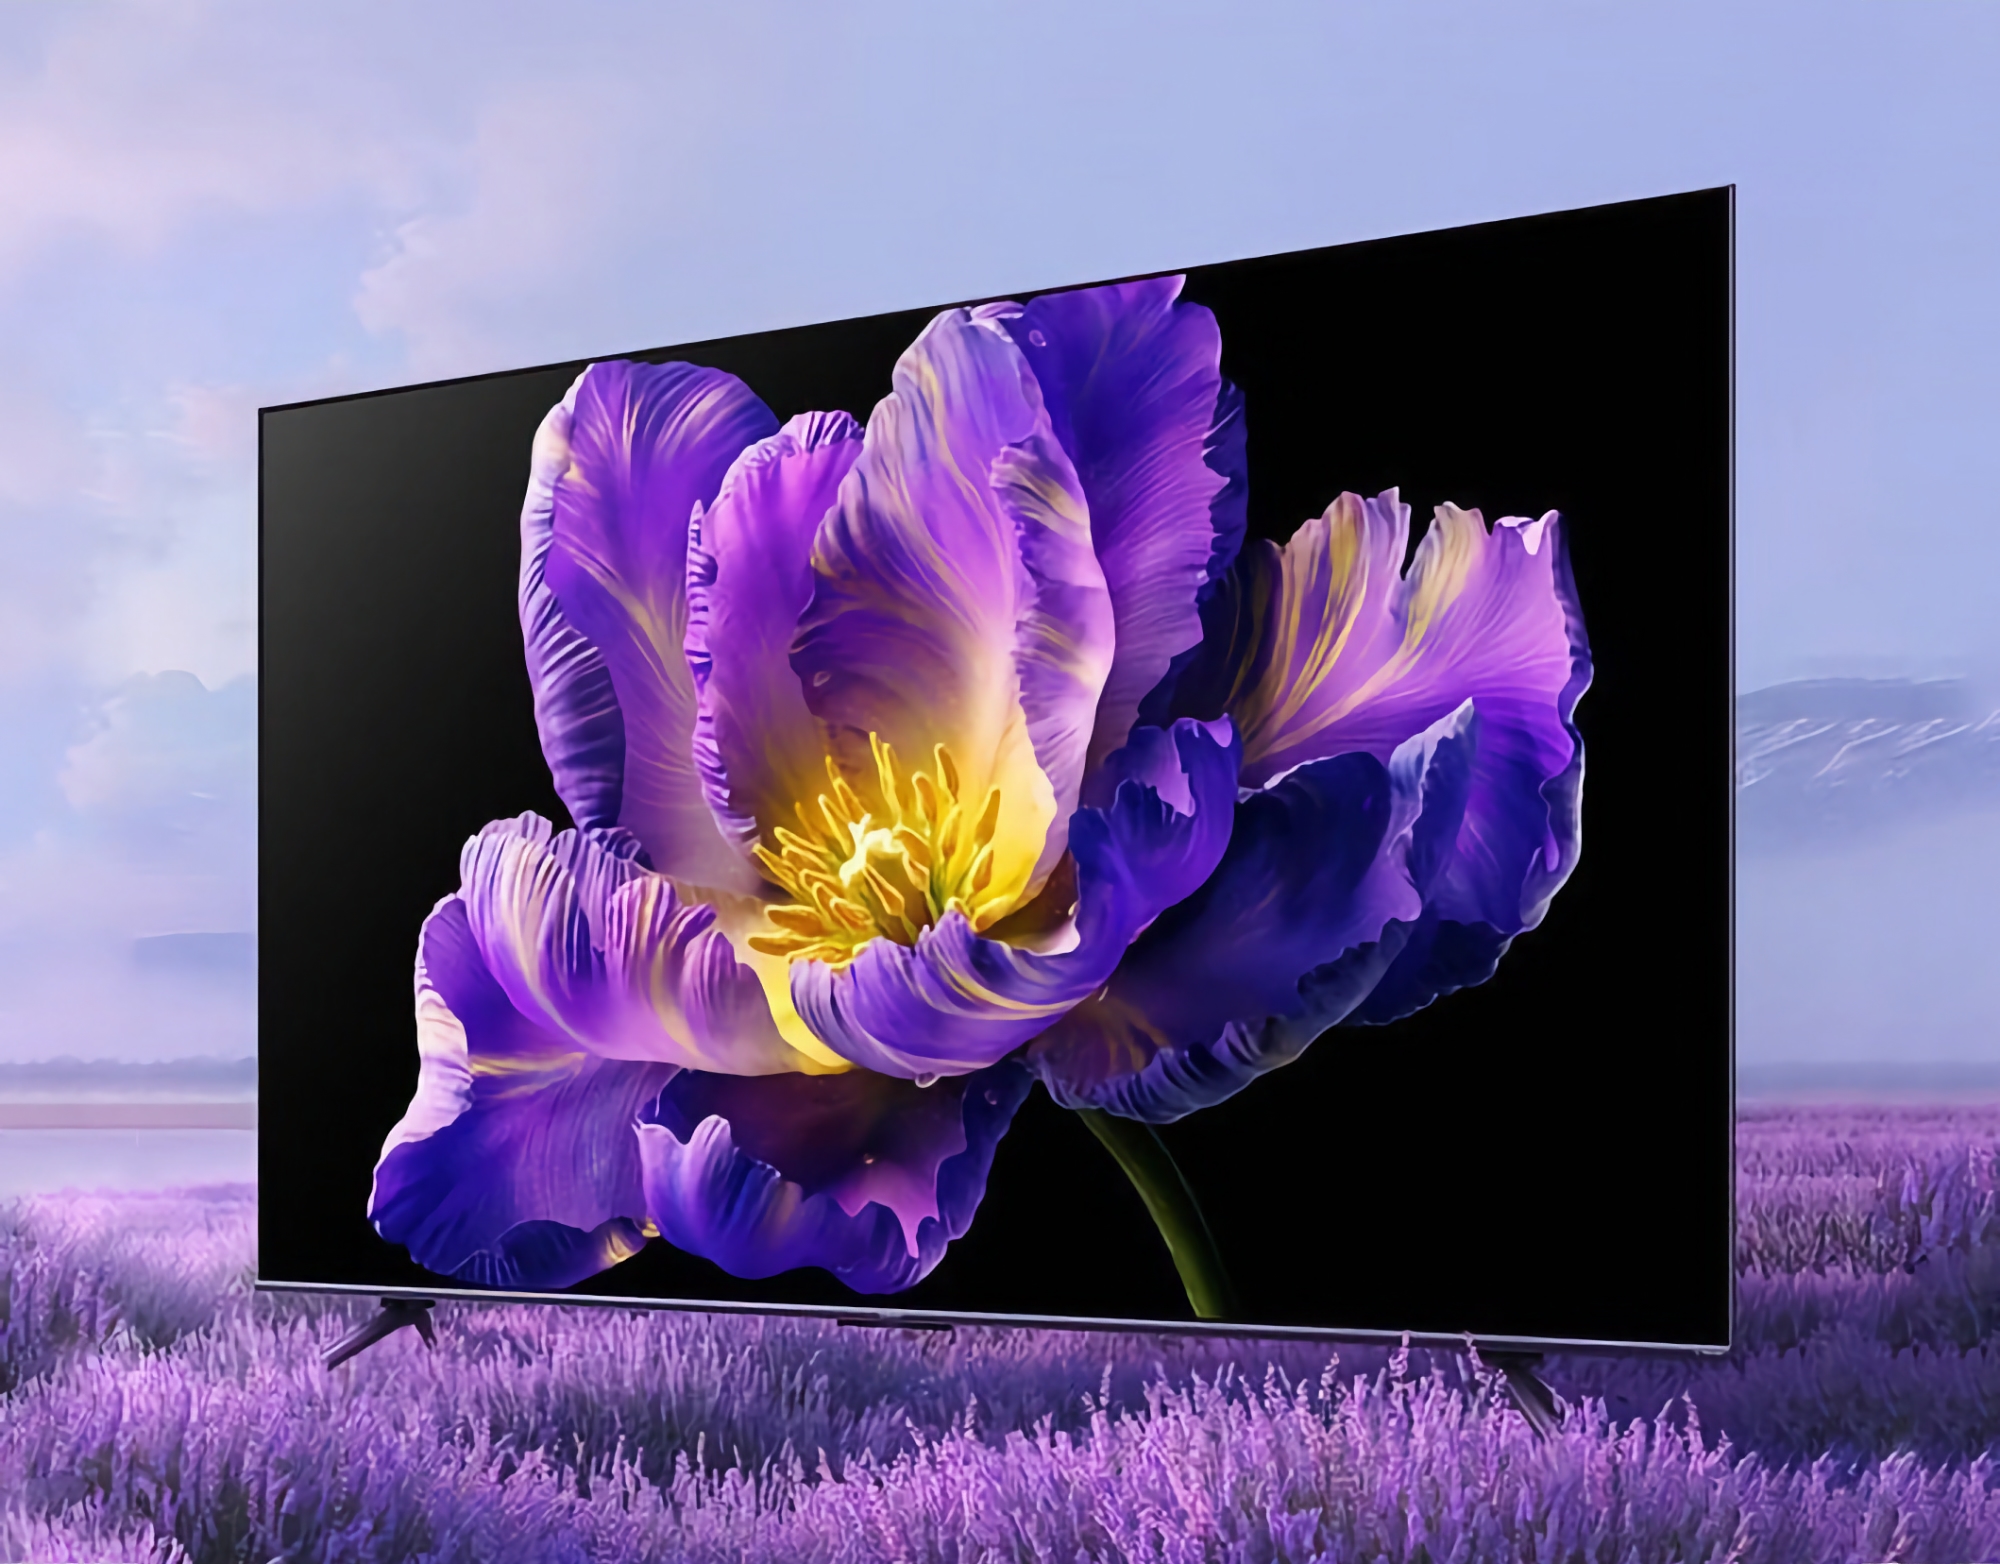 Xiaomi has unveiled TV S85 Mini LED with 4K display at 144Hz and HyperOS on board